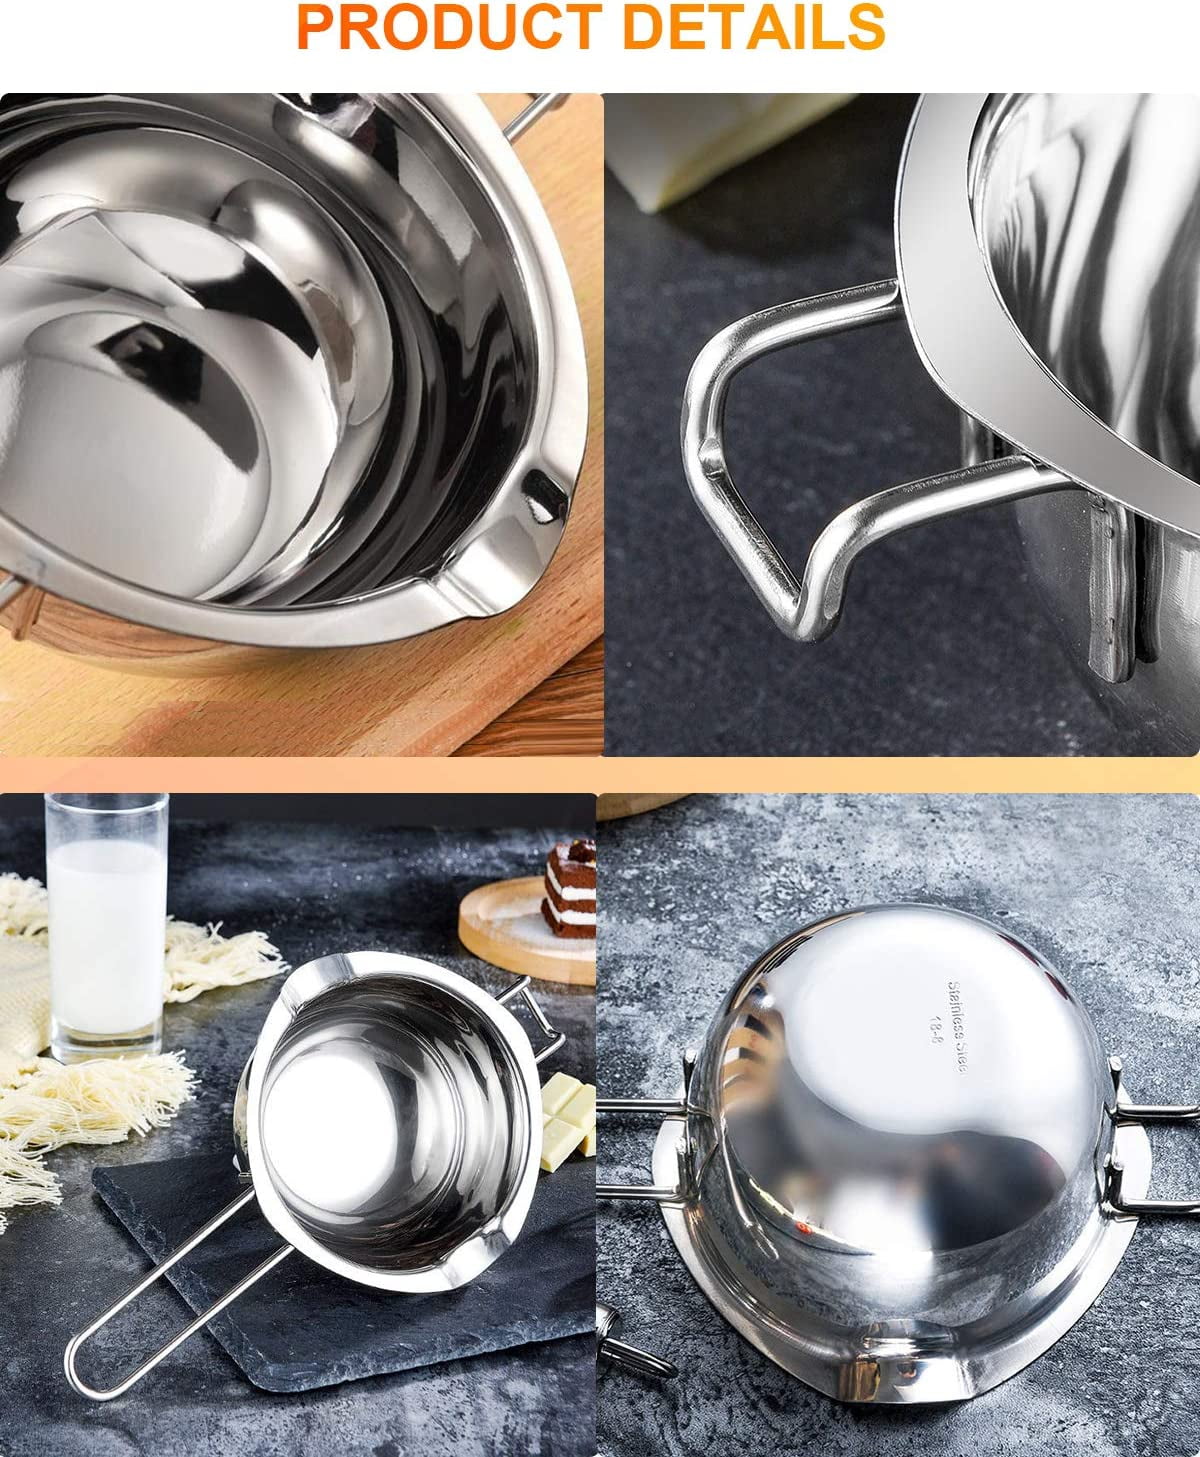 Double Boiler - 600ml Stainless Steel Melting Pot with Heat Resistant Handle, Cohoop 30418/8Large Baking Tools for Melting Chocolate, Butter, Candy